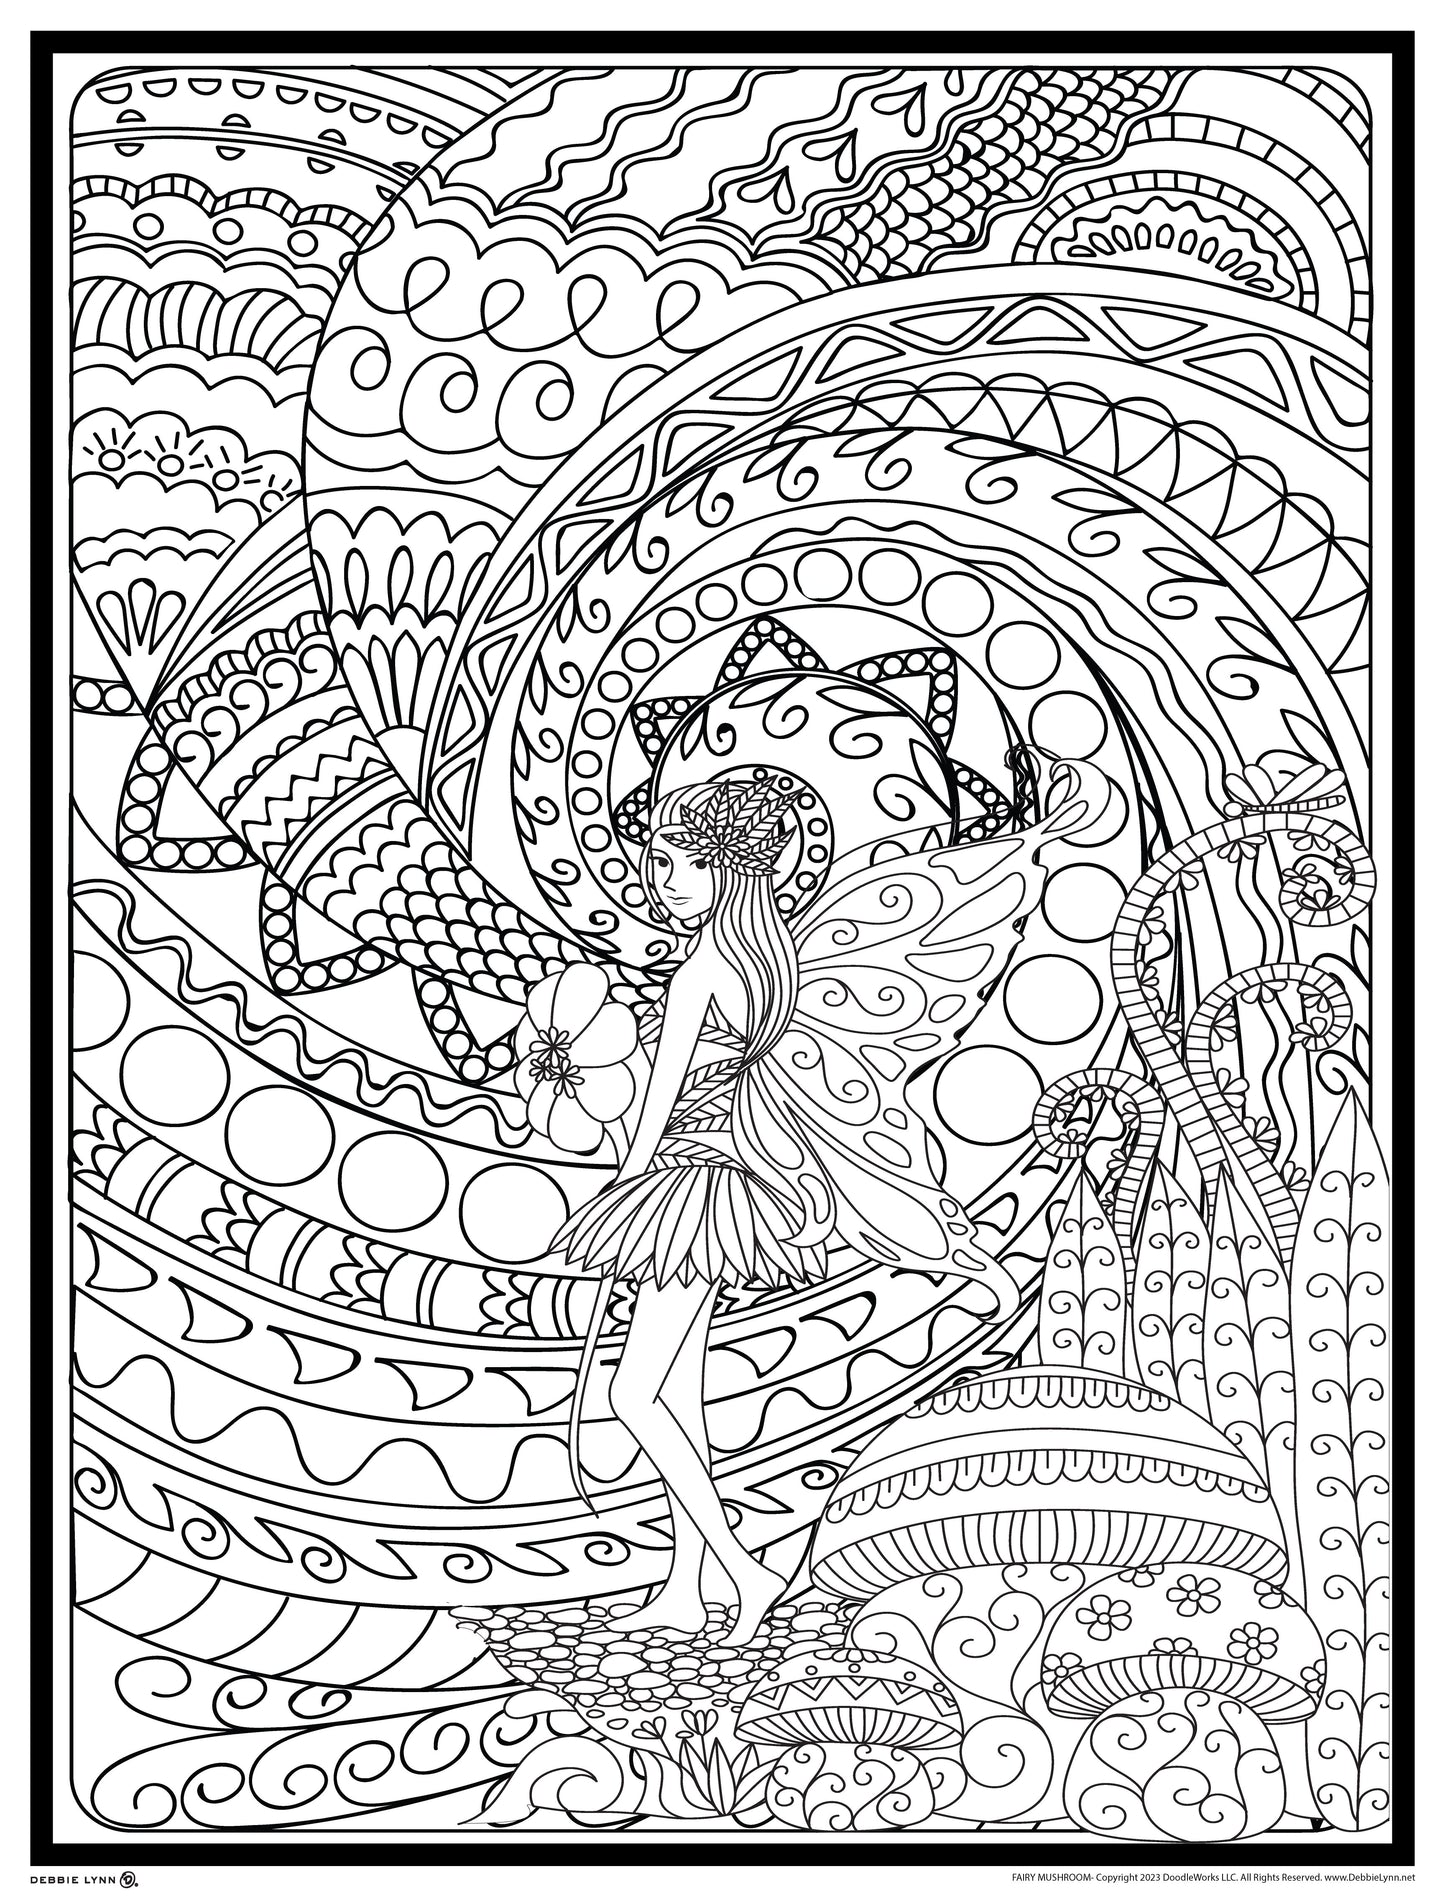 Fairy Mushroom Giant Coloring Poster